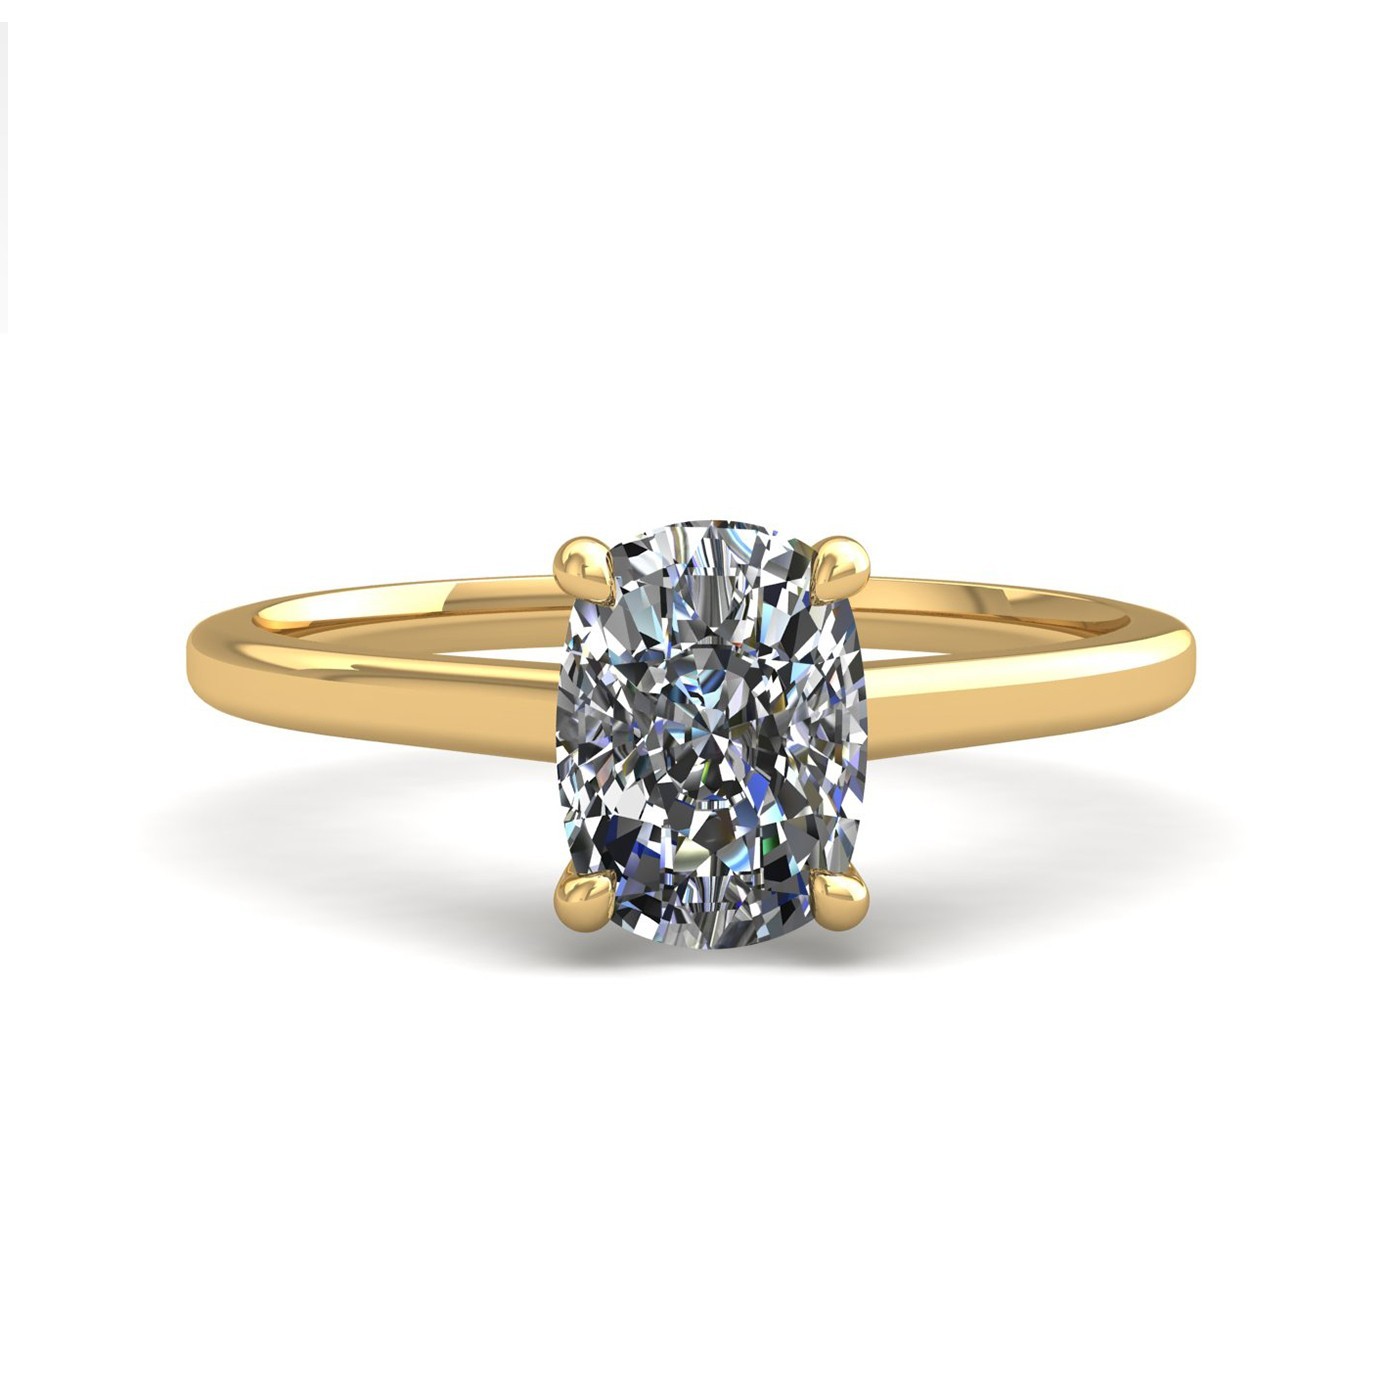 18k yellow gold  0,80 ct 4 prongs solitaire elongated cushion cut diamond engagement ring with whisper thin band Photos & images